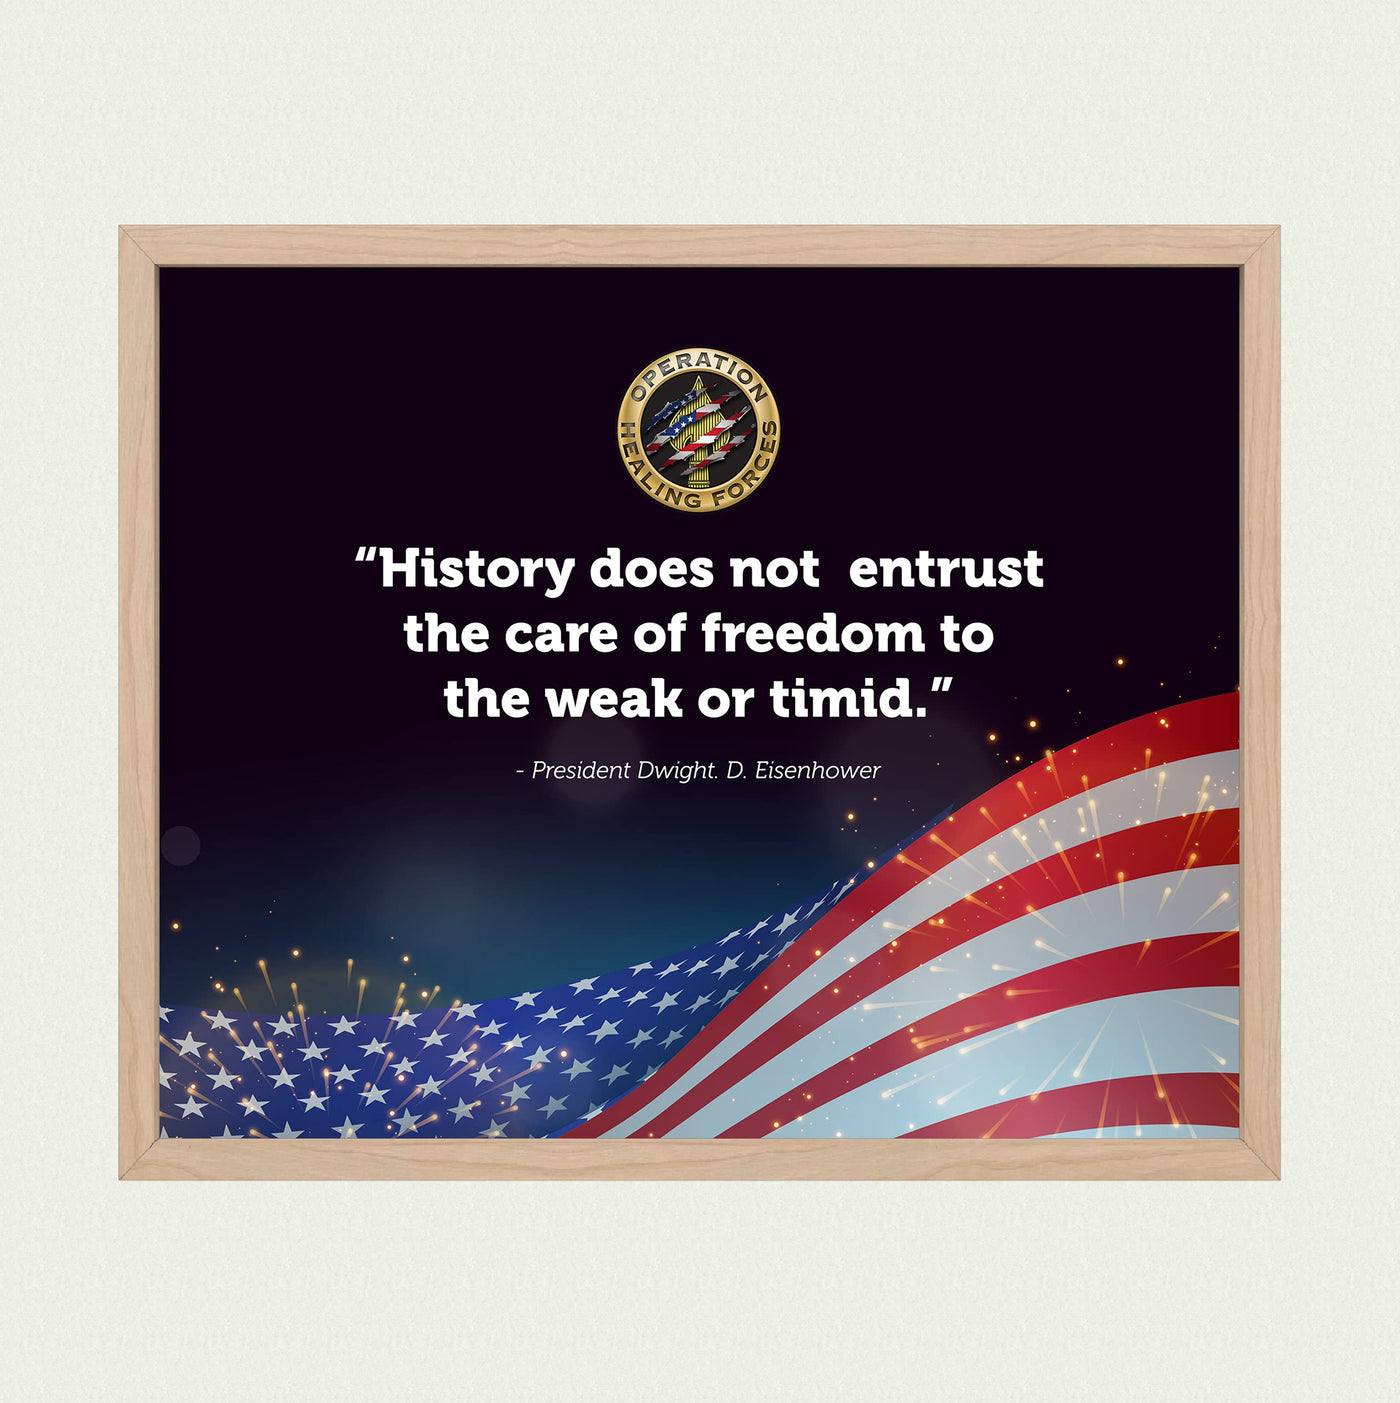 Dwight D. Eisenhower Quotes-"History Does Not Entrust Care of Freedom to the Weak or Timid" -10x8" American Flag Wall Art Print-Ready to Frame. Home-Office-School-Library Decor. Great Political Gift!